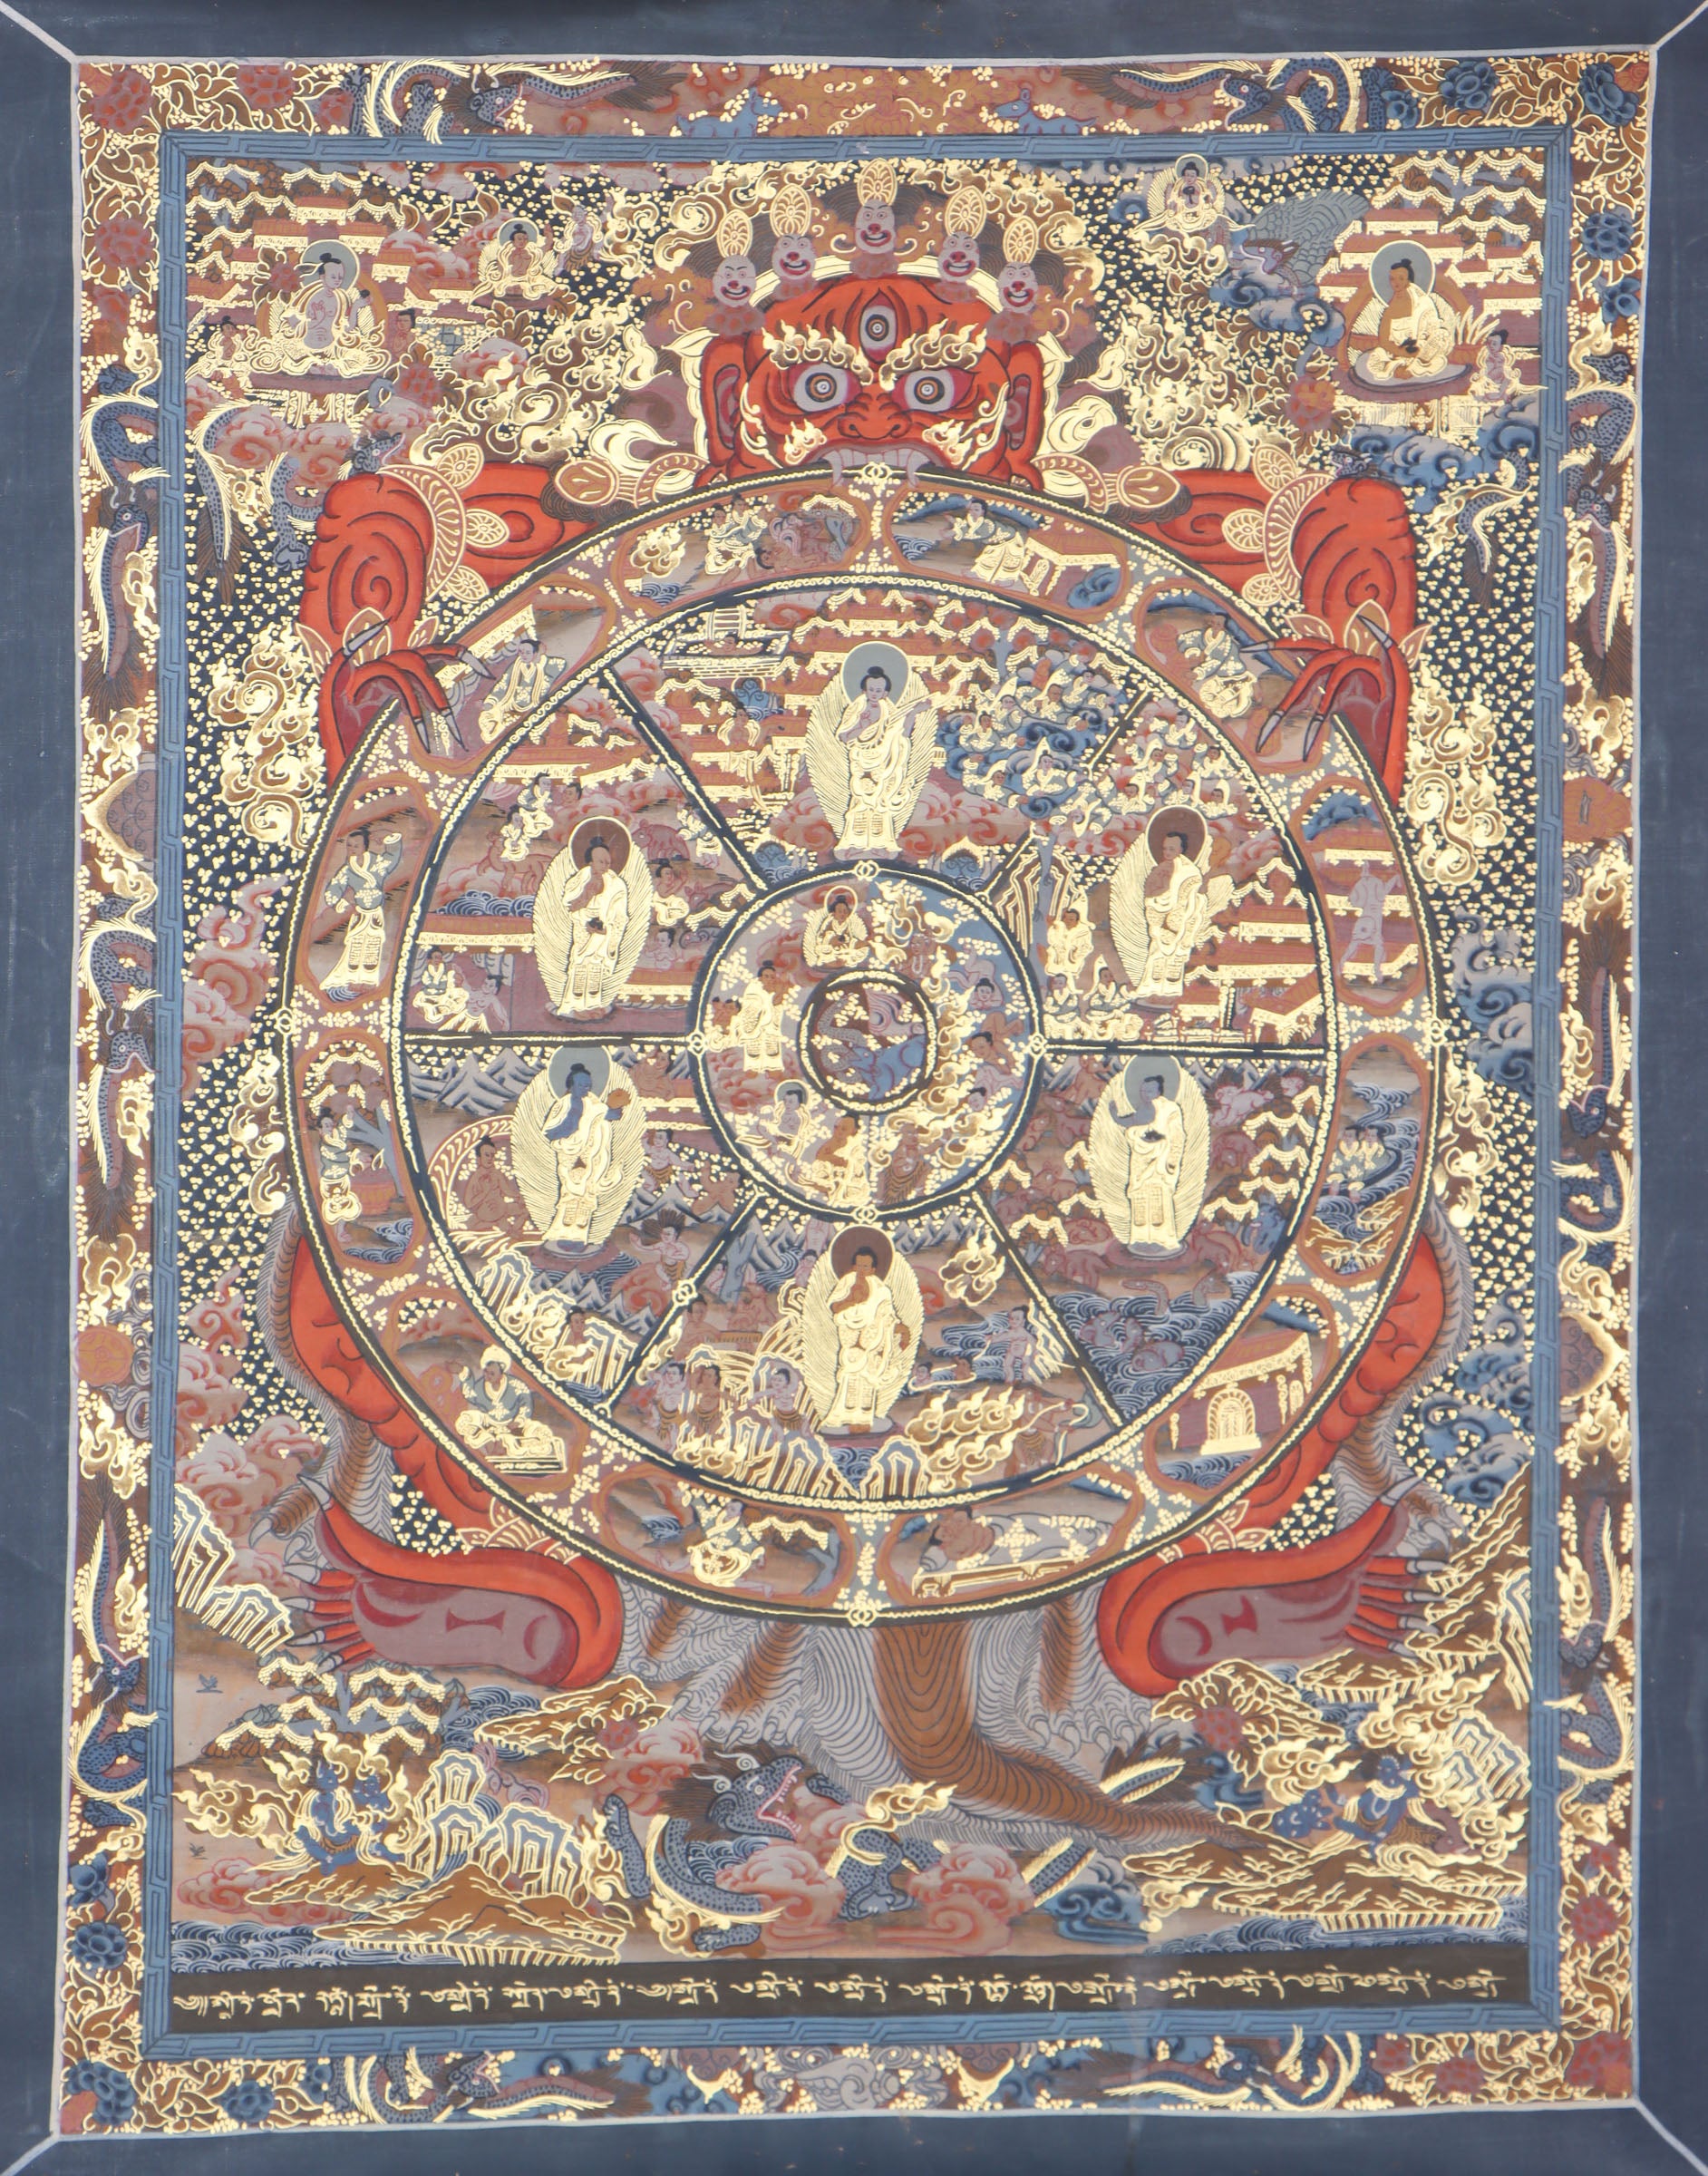 Wheel of Life Thangka  provides  an effective tool for spiritual contemplation and understanding.